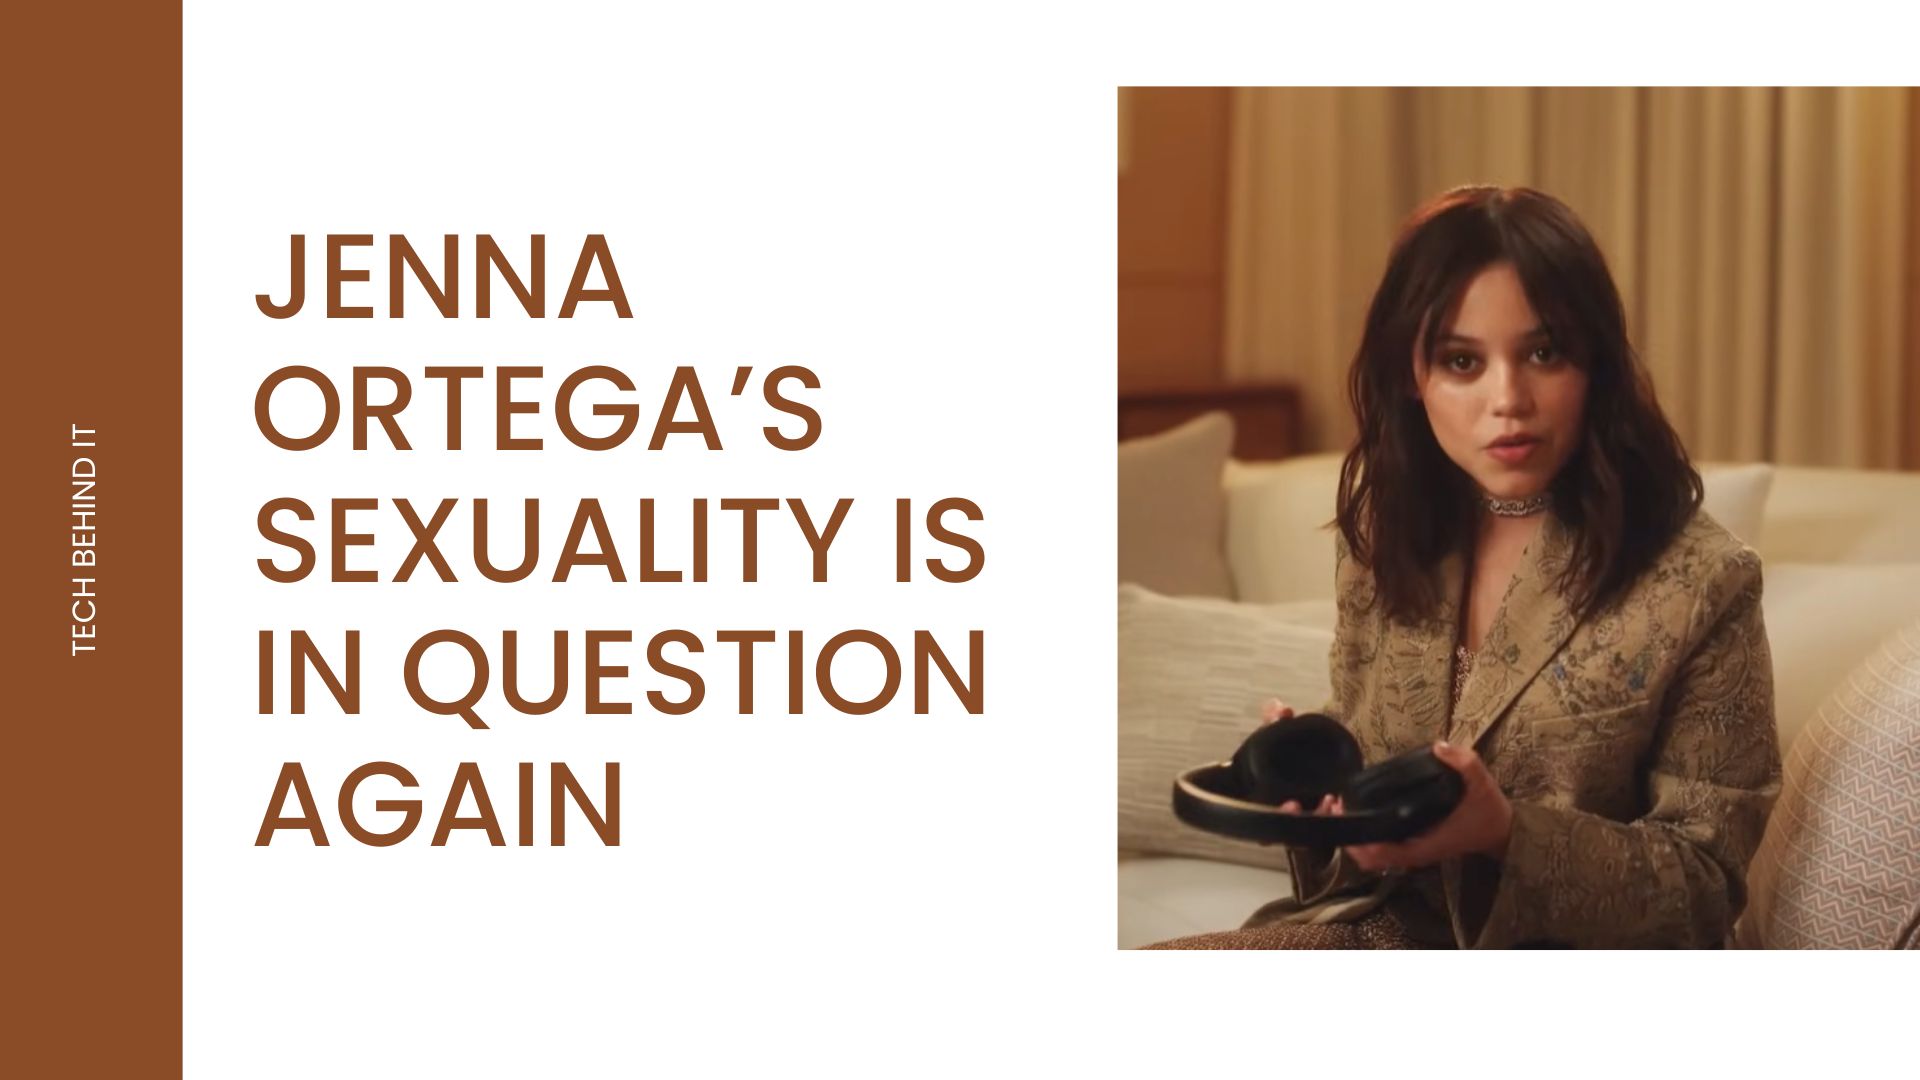 Jenna Ortega’s sexuality is in question again